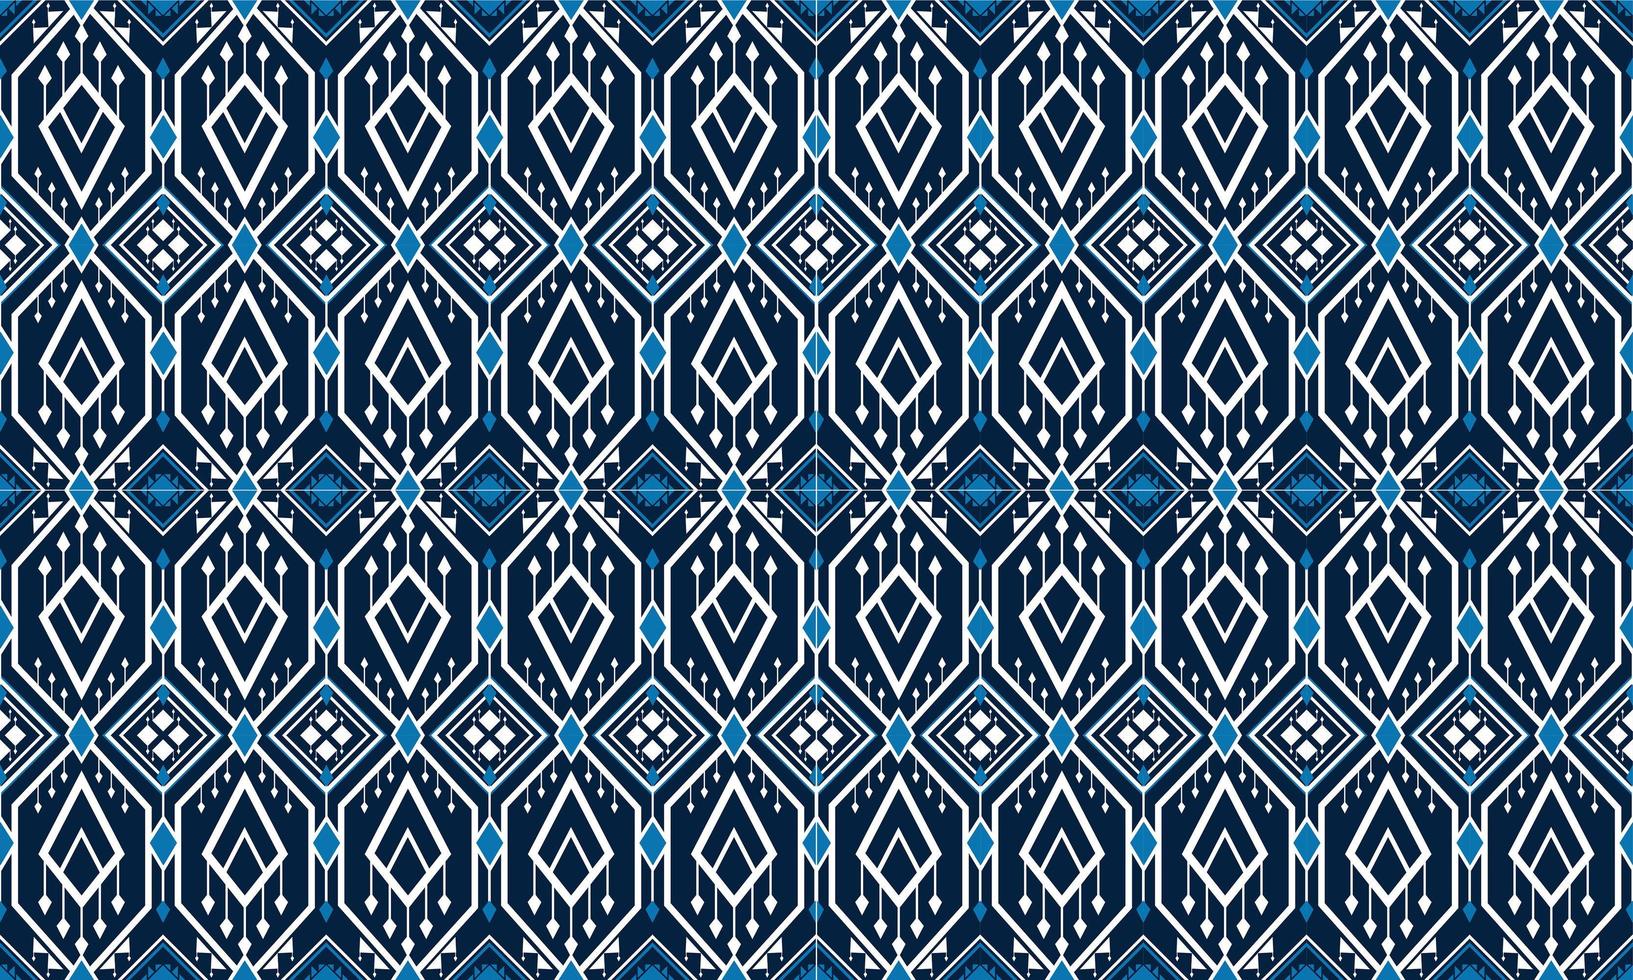 Geometric ethnic oriental pattern traditional Design for background,carpet,wallpaper,clothing,wrapping,Batik,fabric,Vector illustration.embroidery style. vector